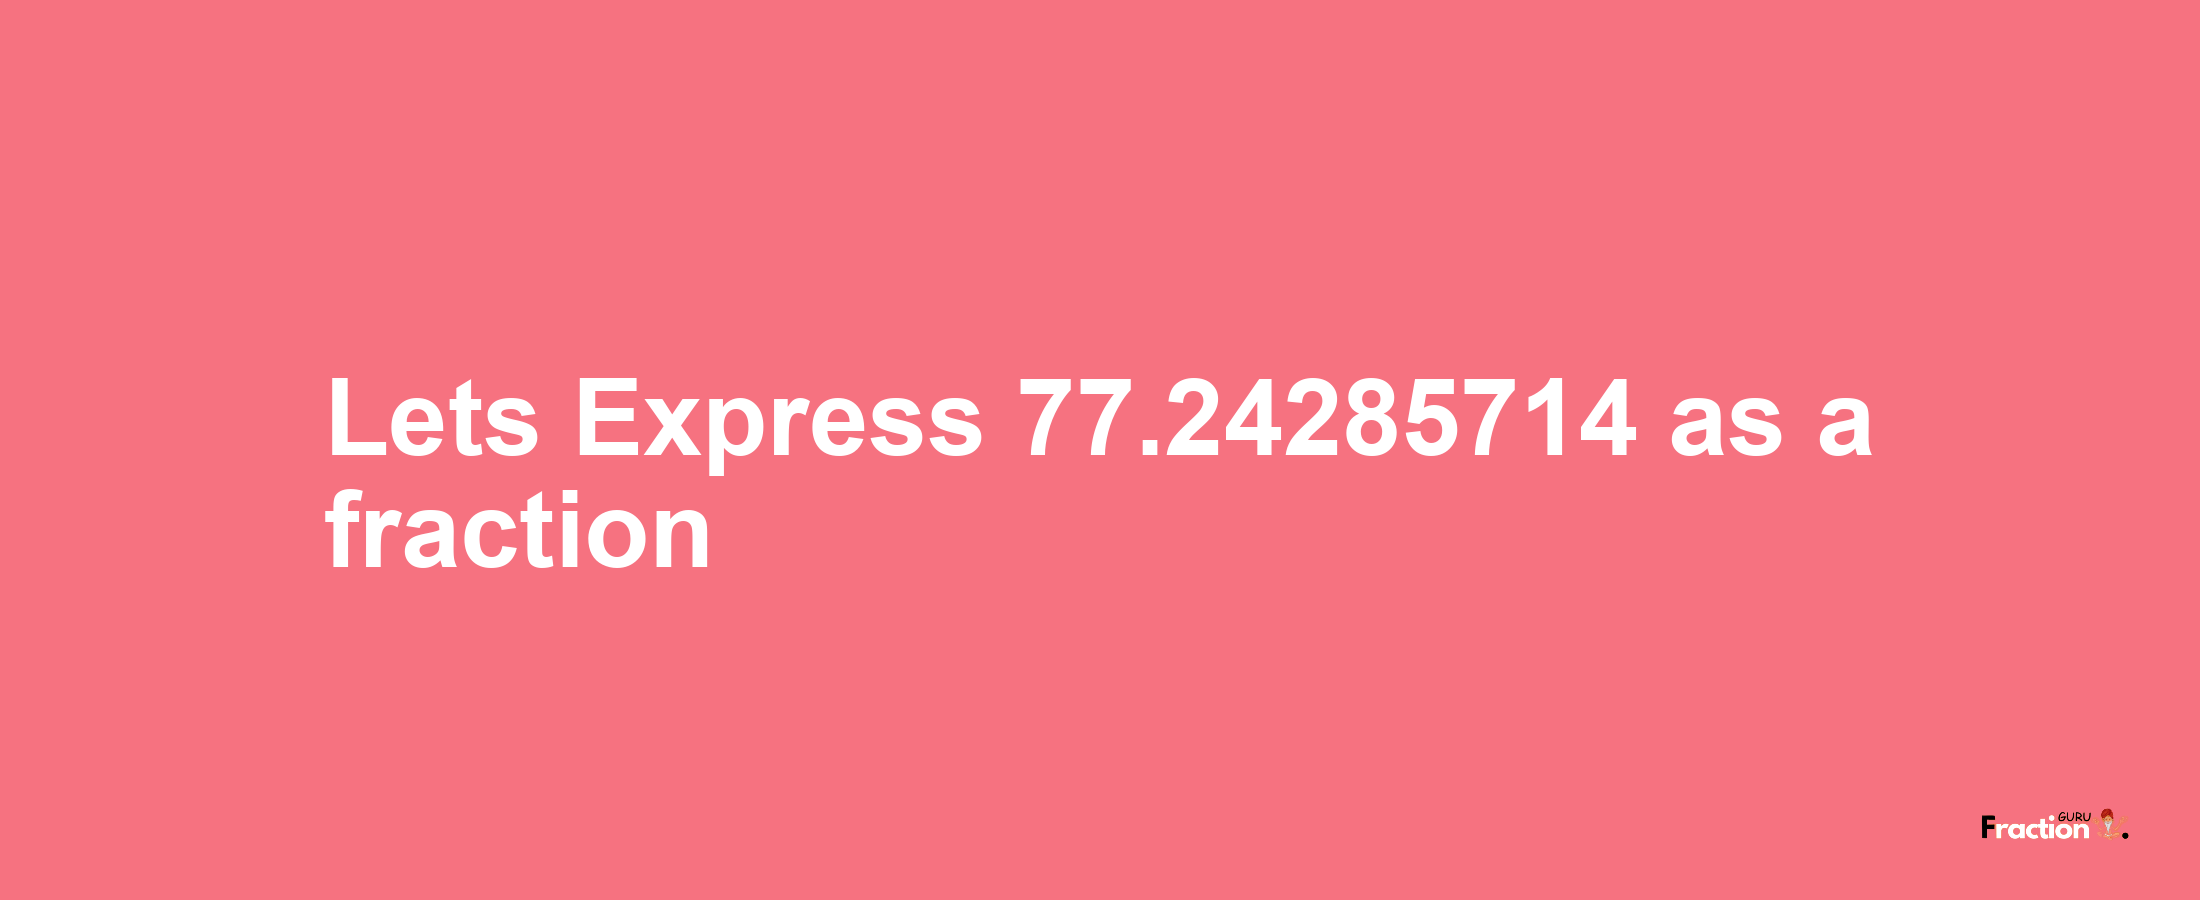 Lets Express 77.24285714 as afraction